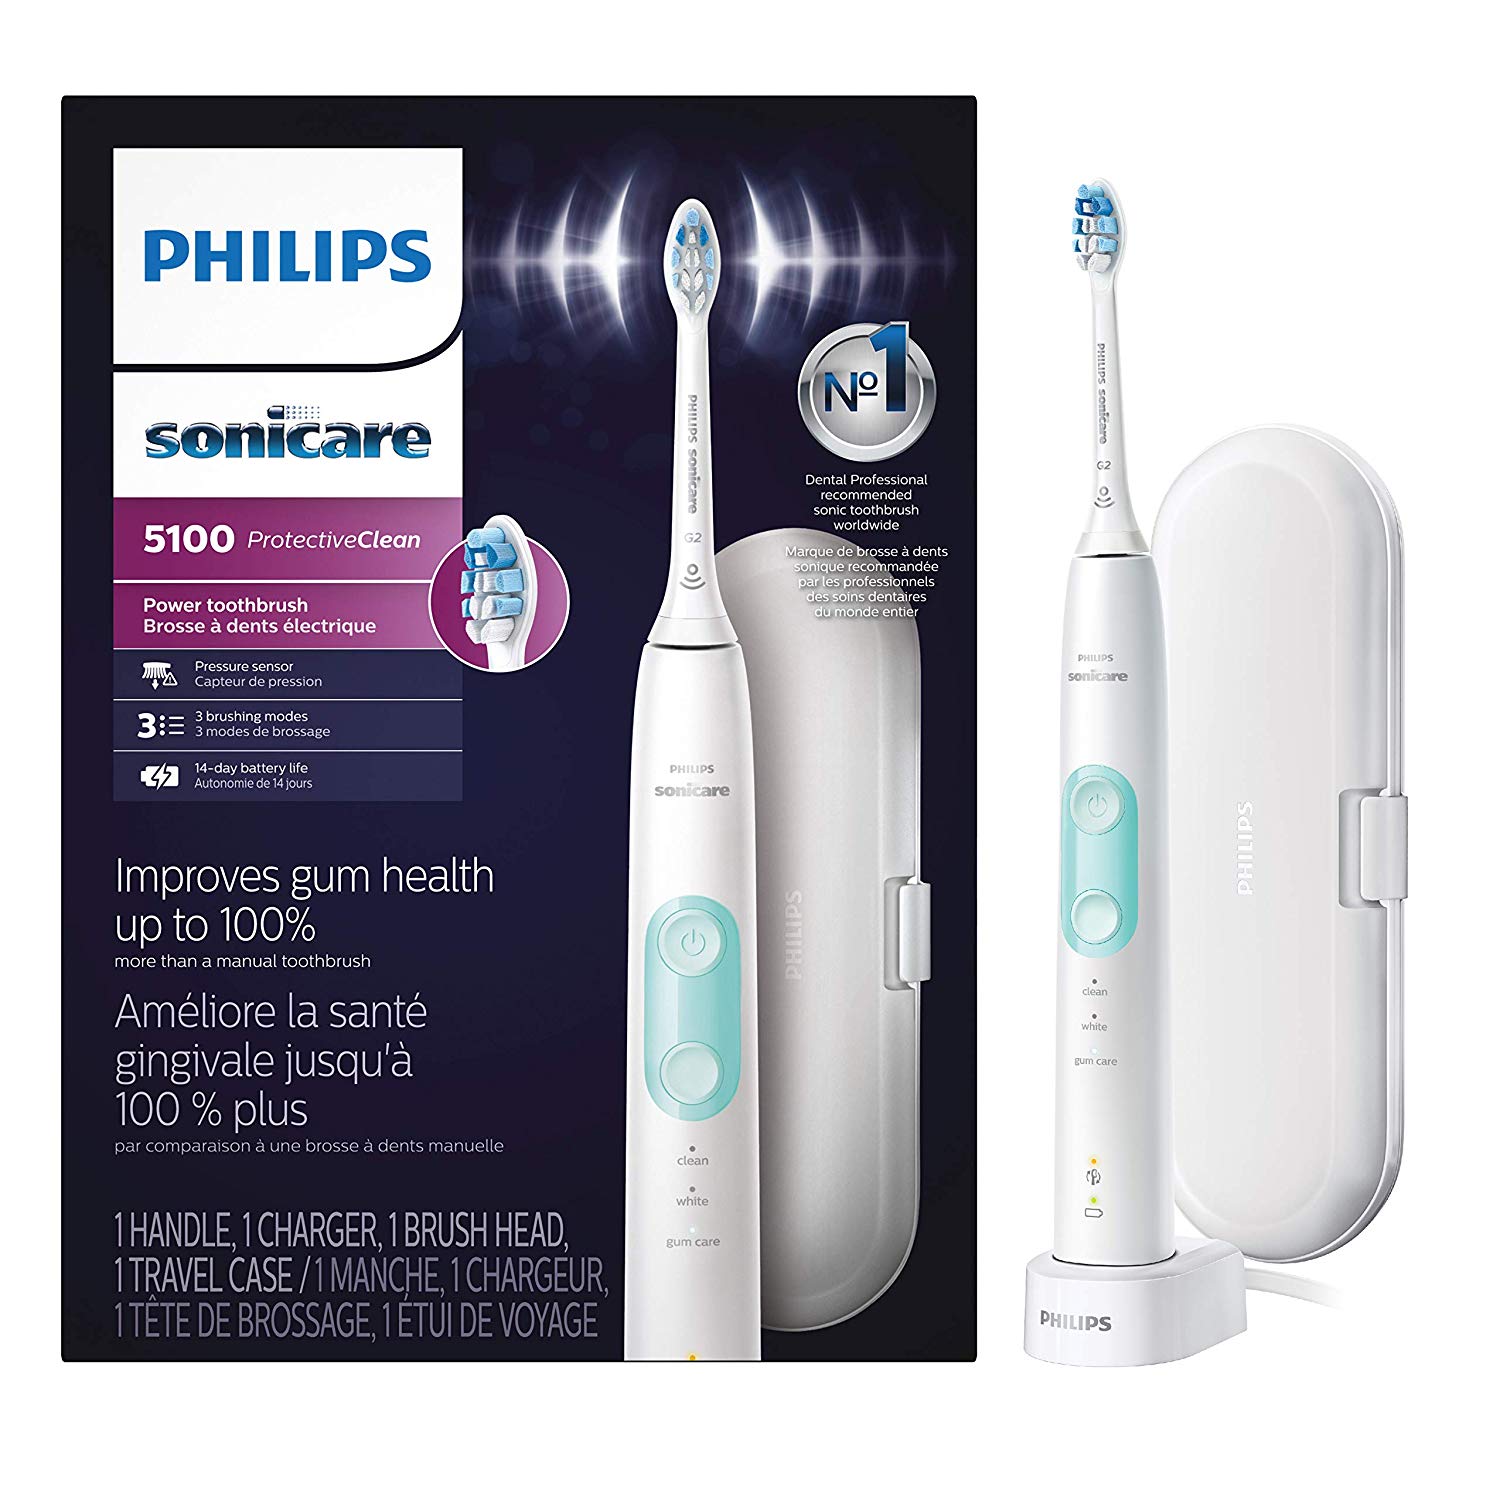 Philips Sonicare ProtectiveClean 5100 Rechargeable Electric Toothbrush, White HX6857/11